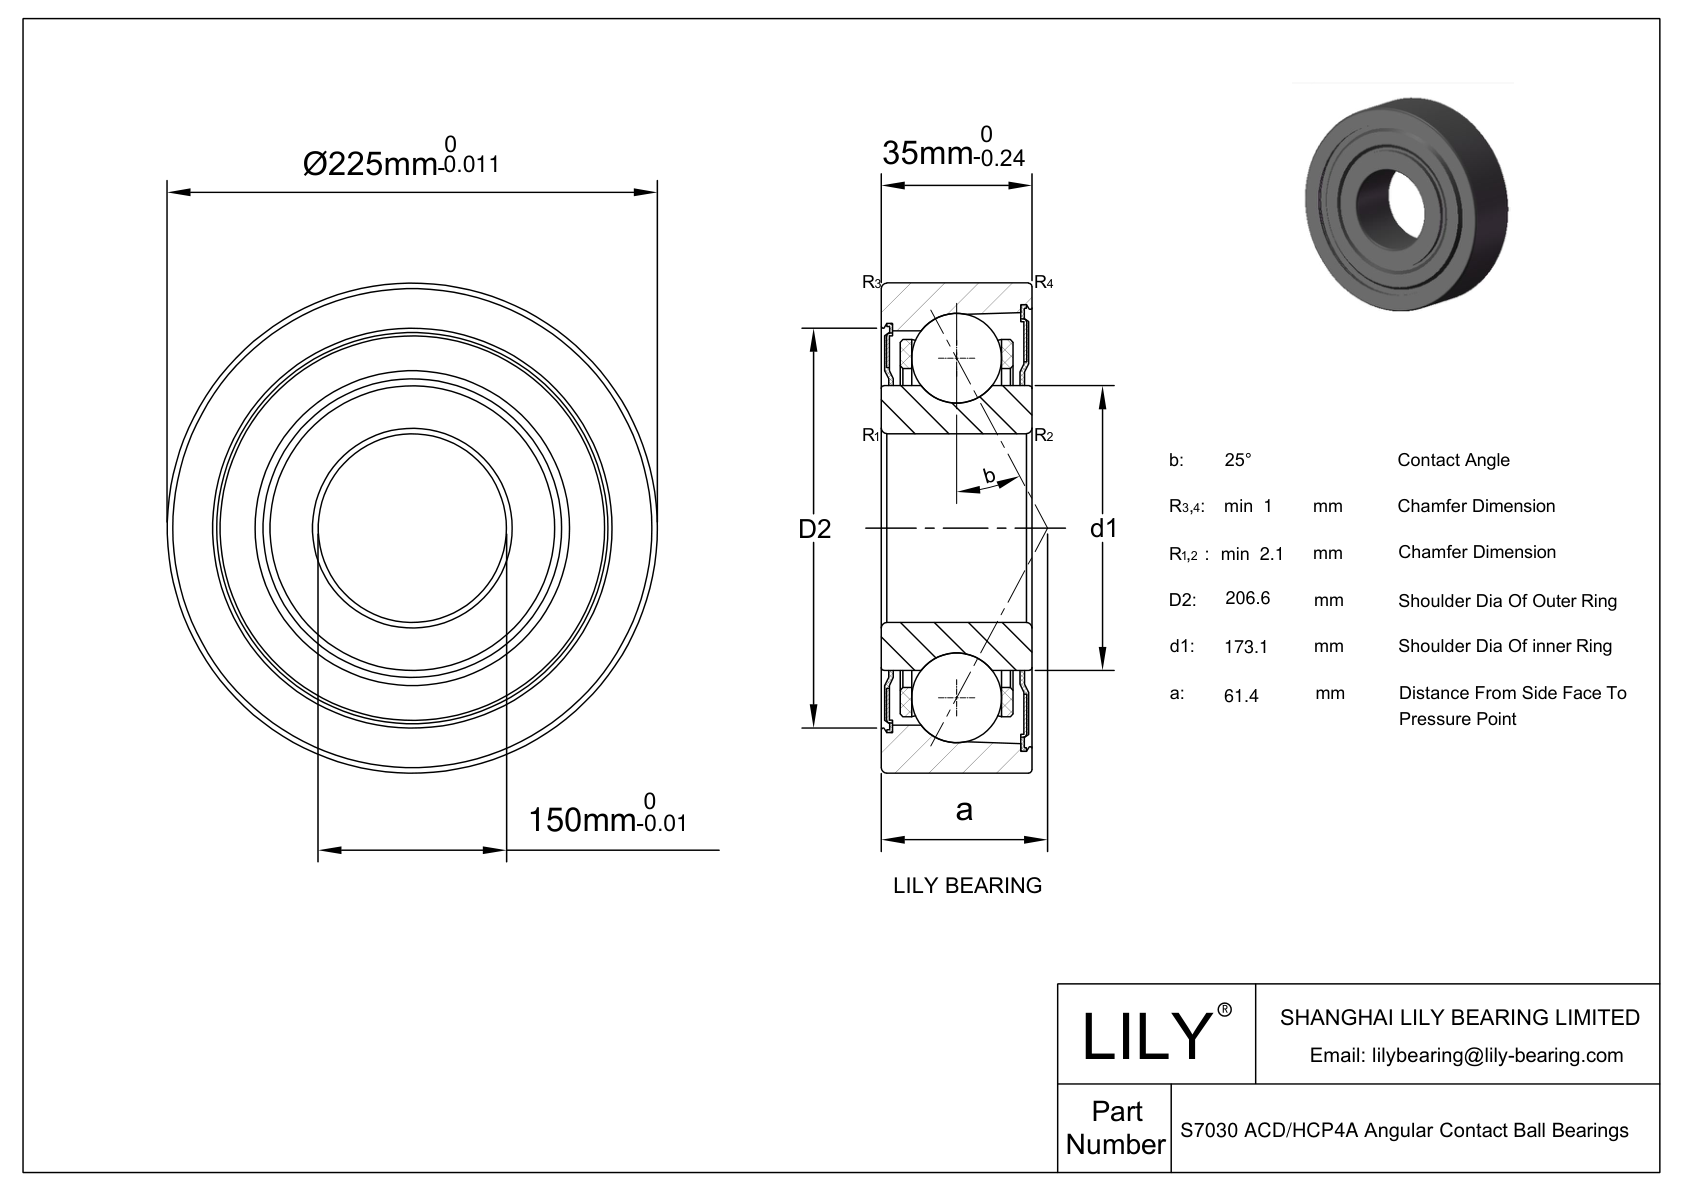 S7030 ACD/HCP4A Super Precision Angular Contact Ball Bearings cad drawing